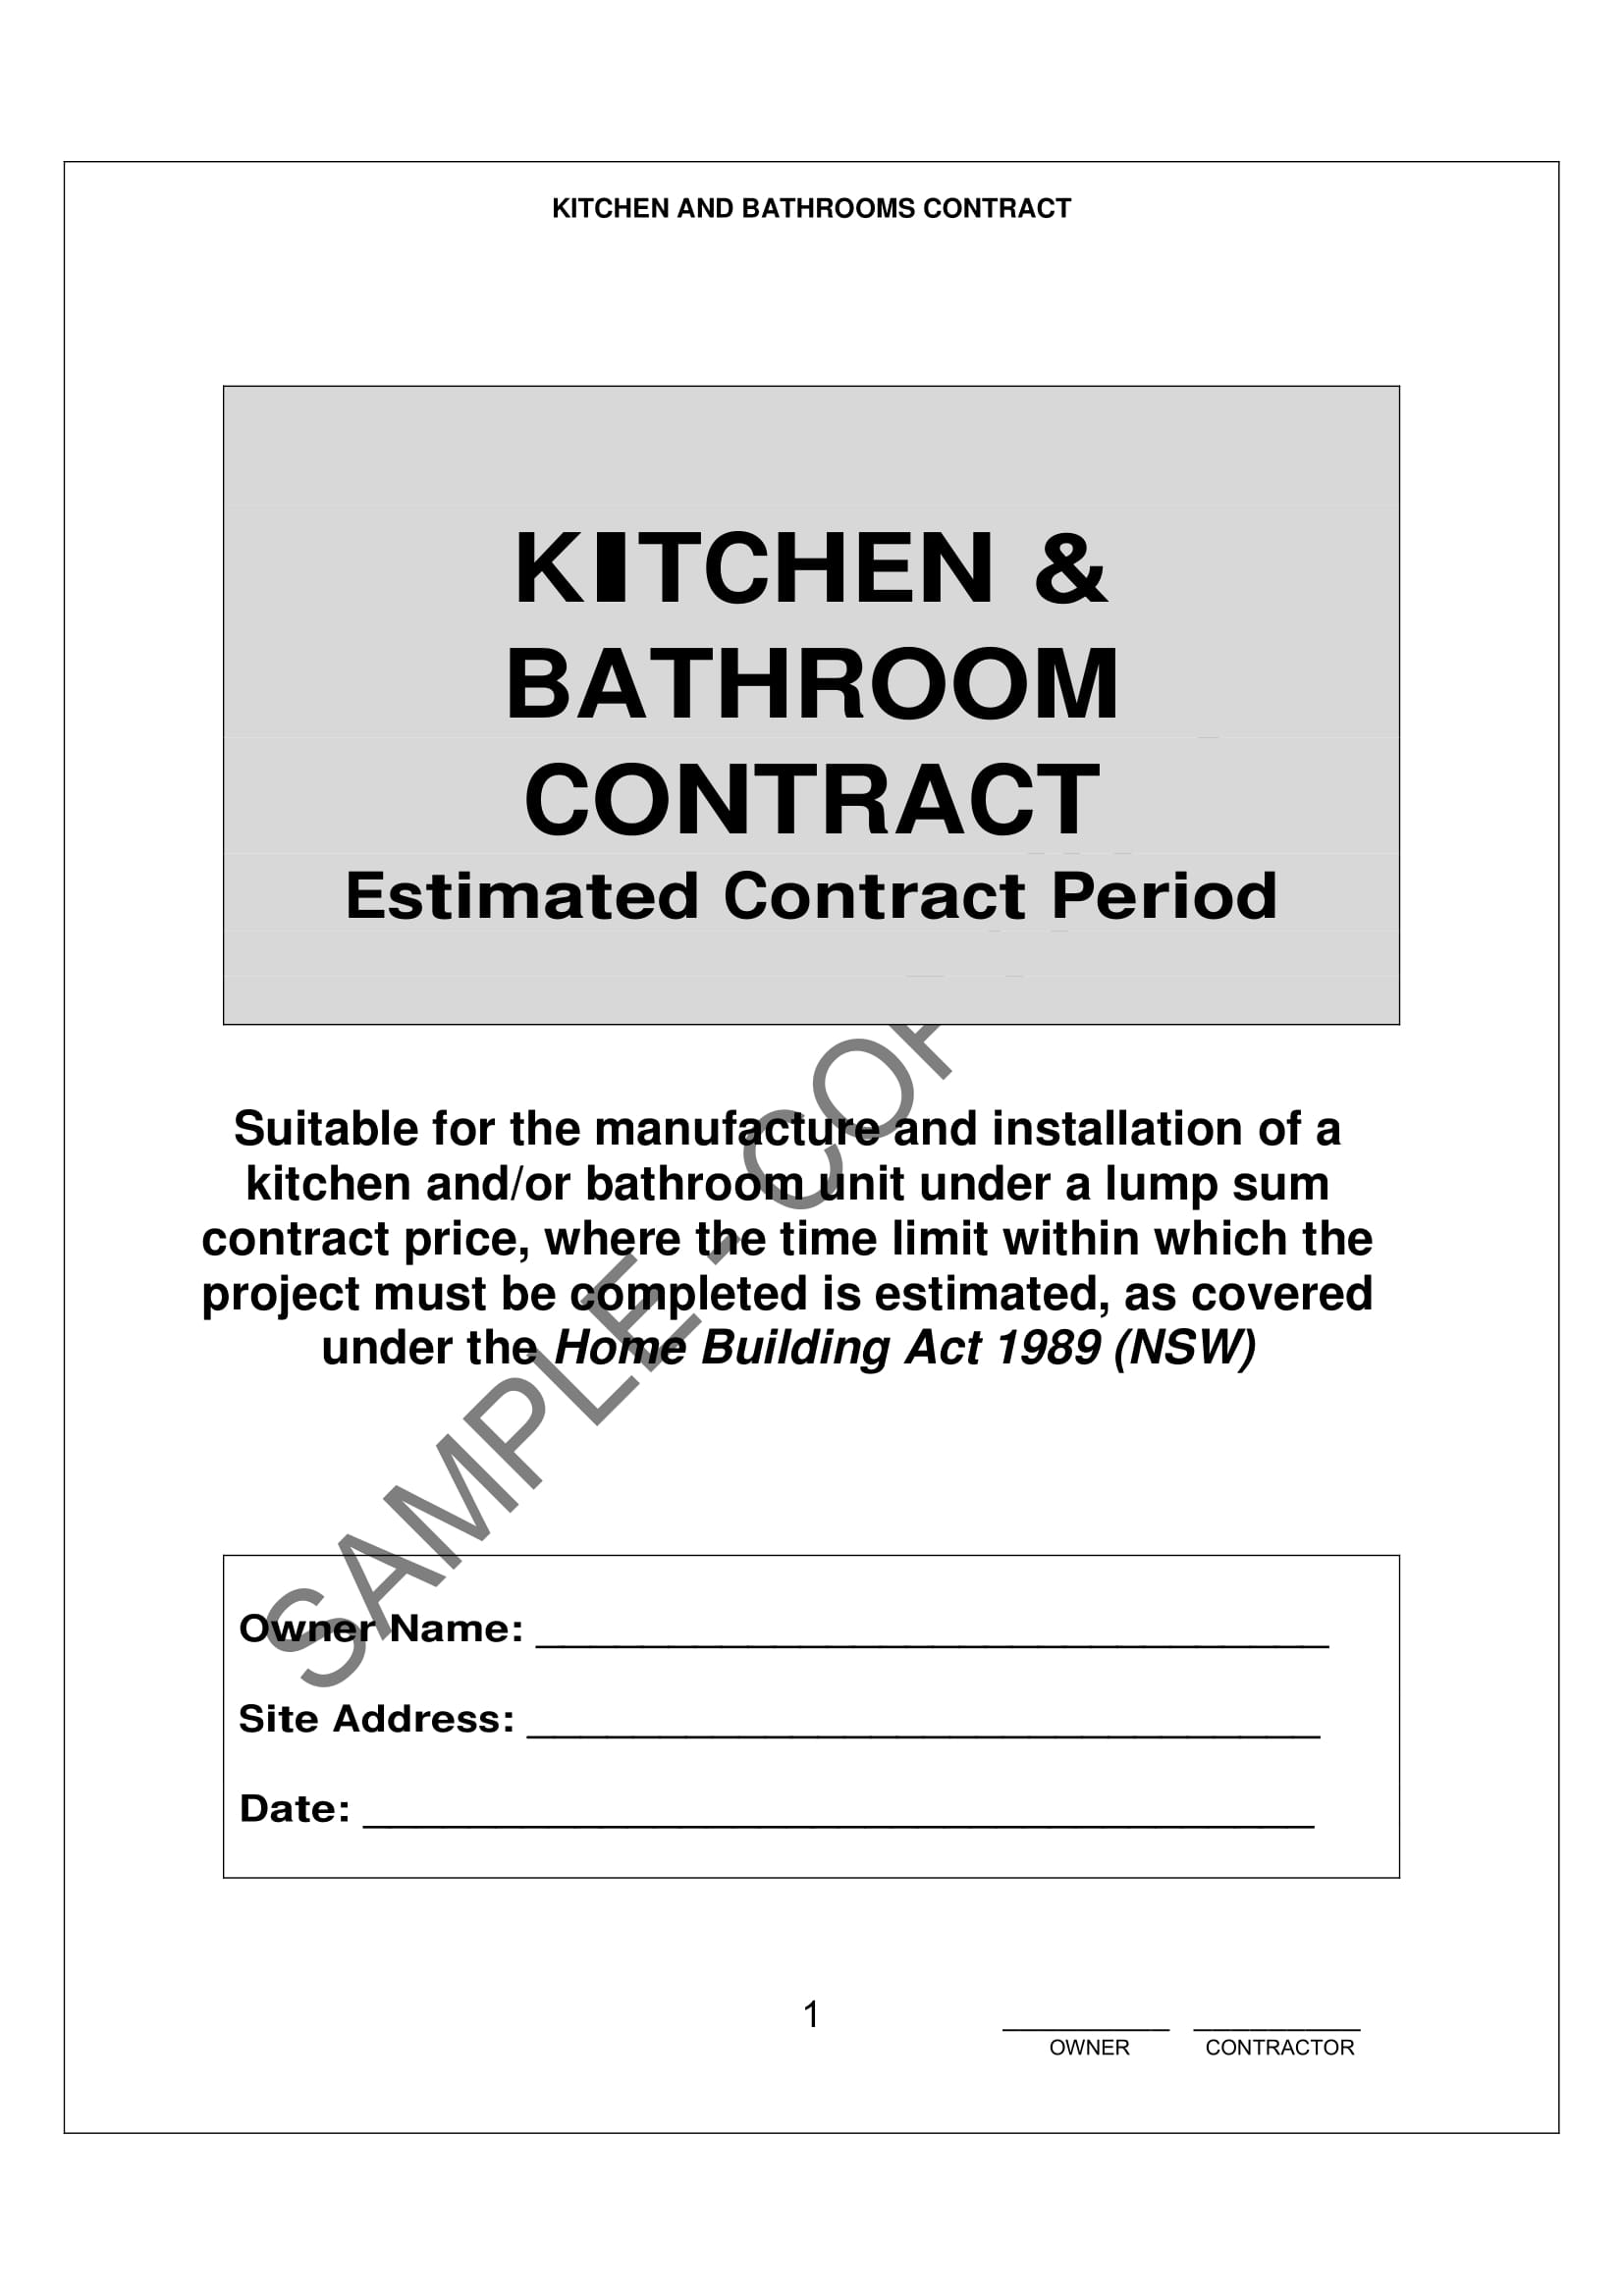 kitchen and bathroom renovation contract template example 1